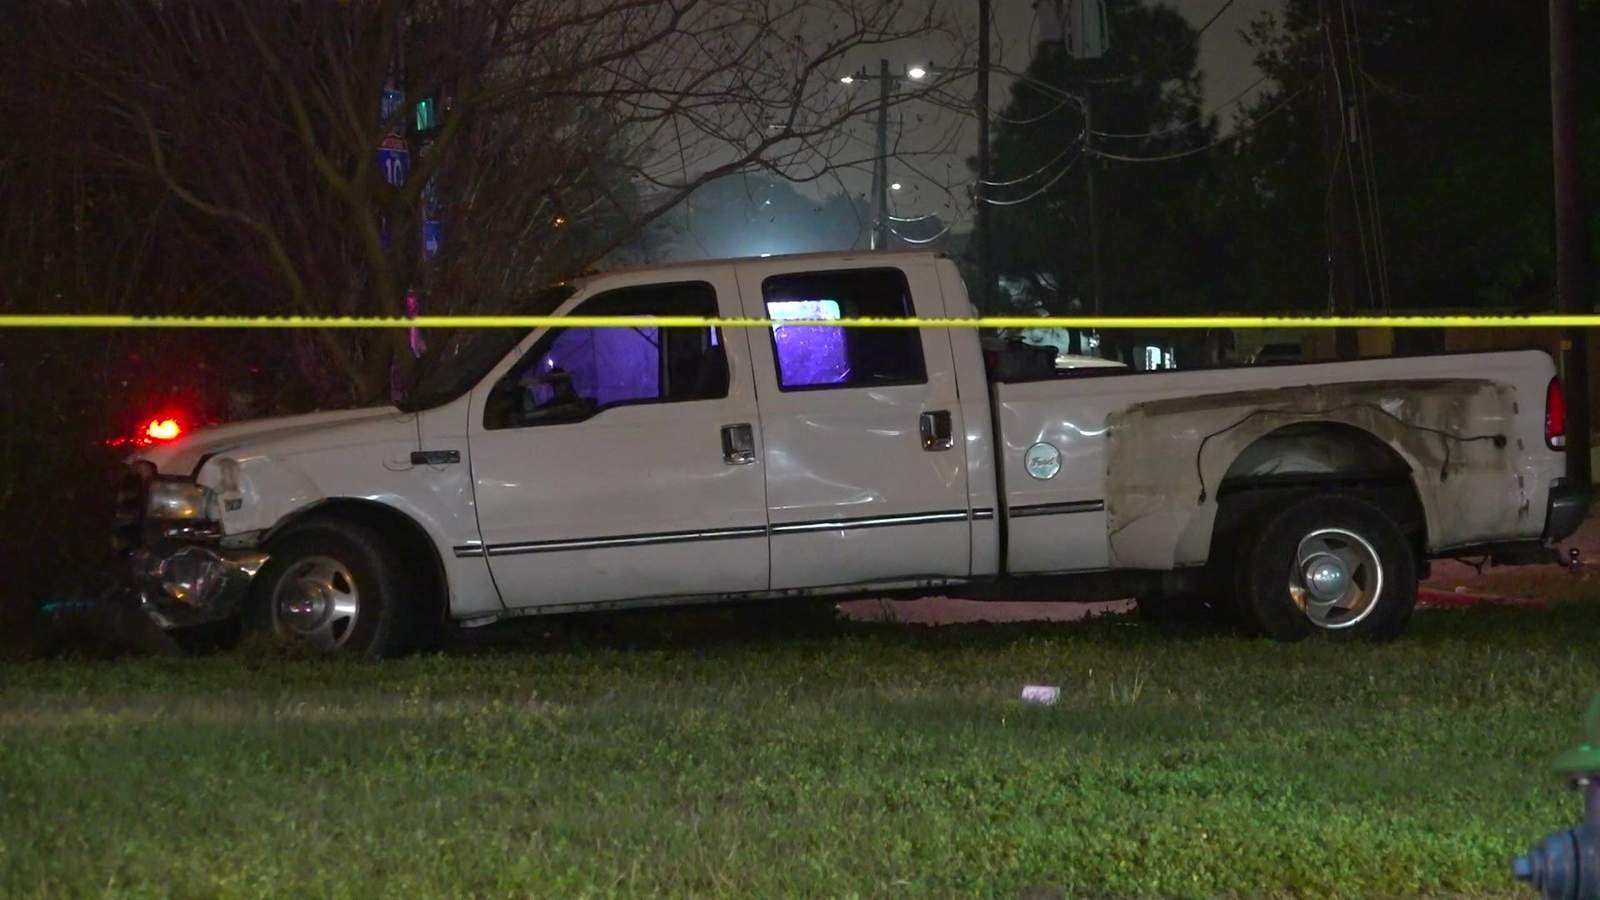 Man killed while chasing stolen truck in historic east Houston cemetery, police say